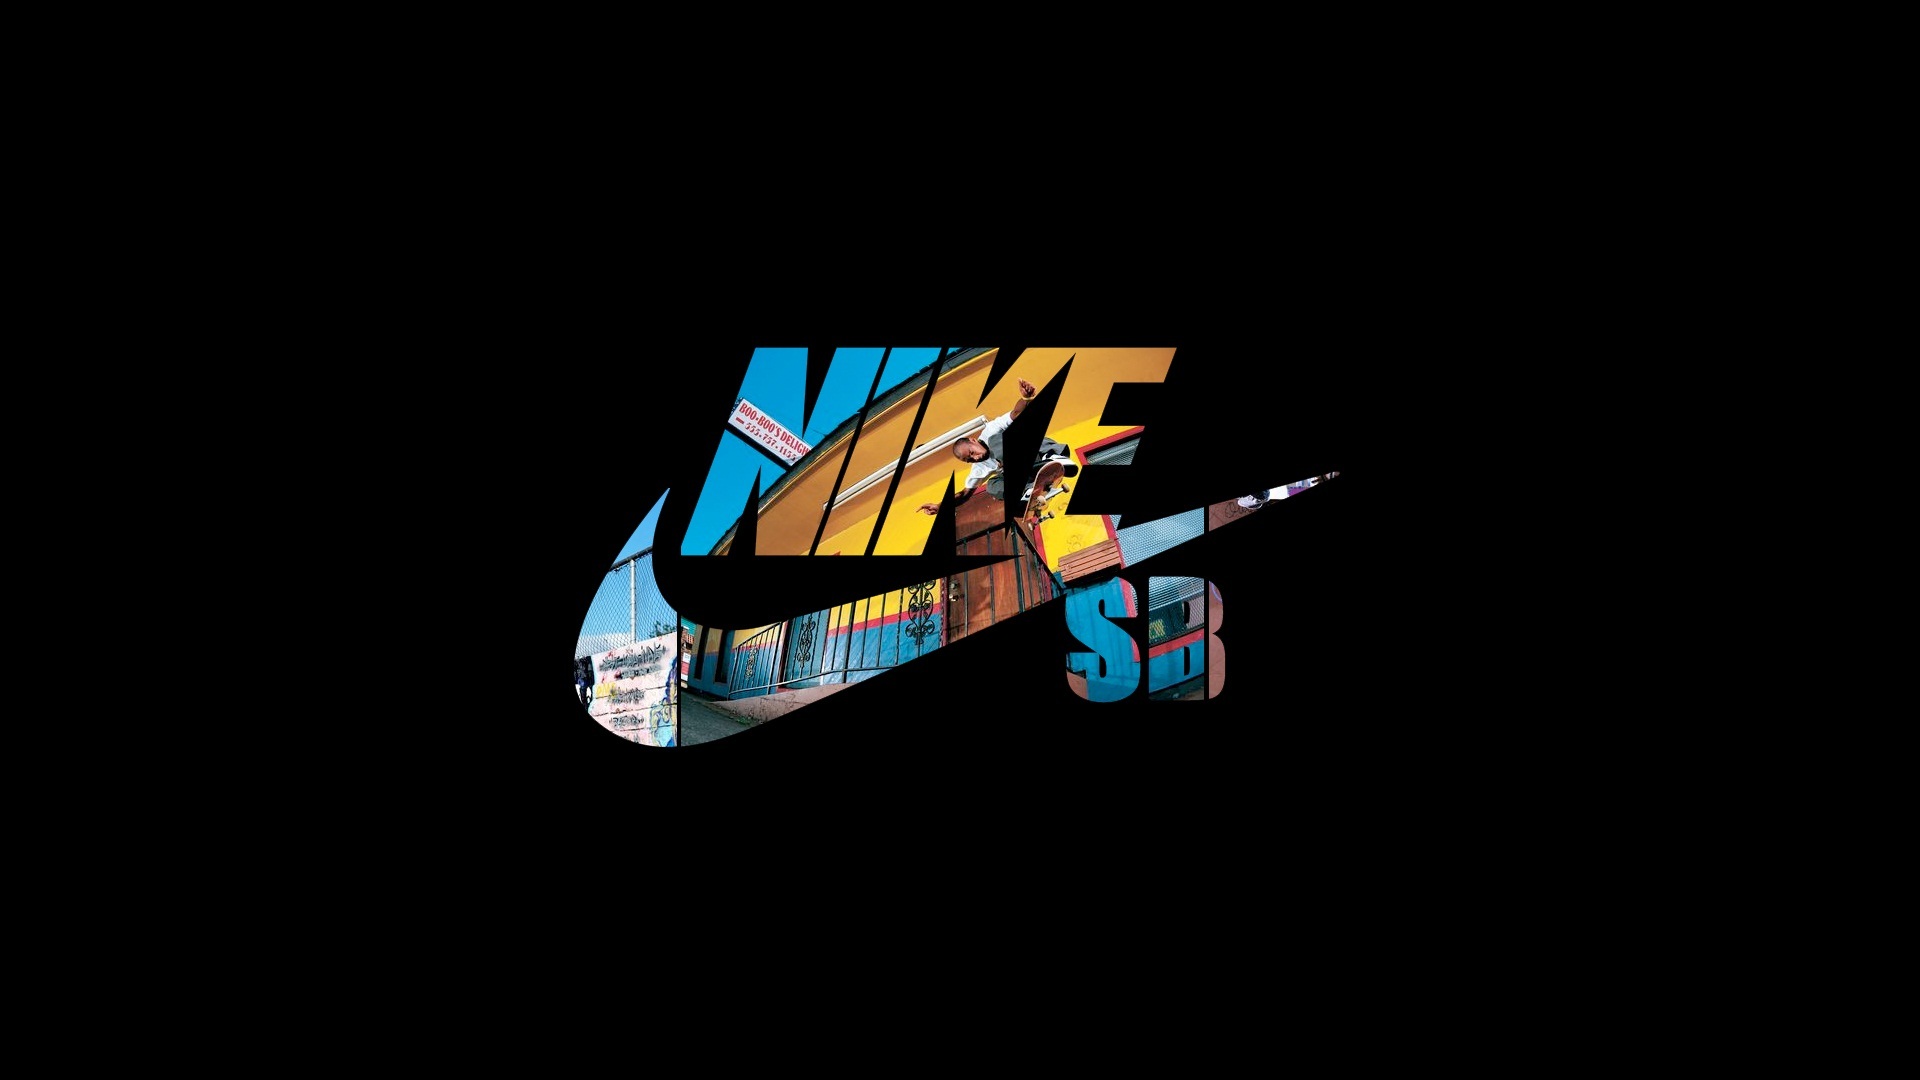 Nike Just Do It Wallpaper 46726 1920x1080 px